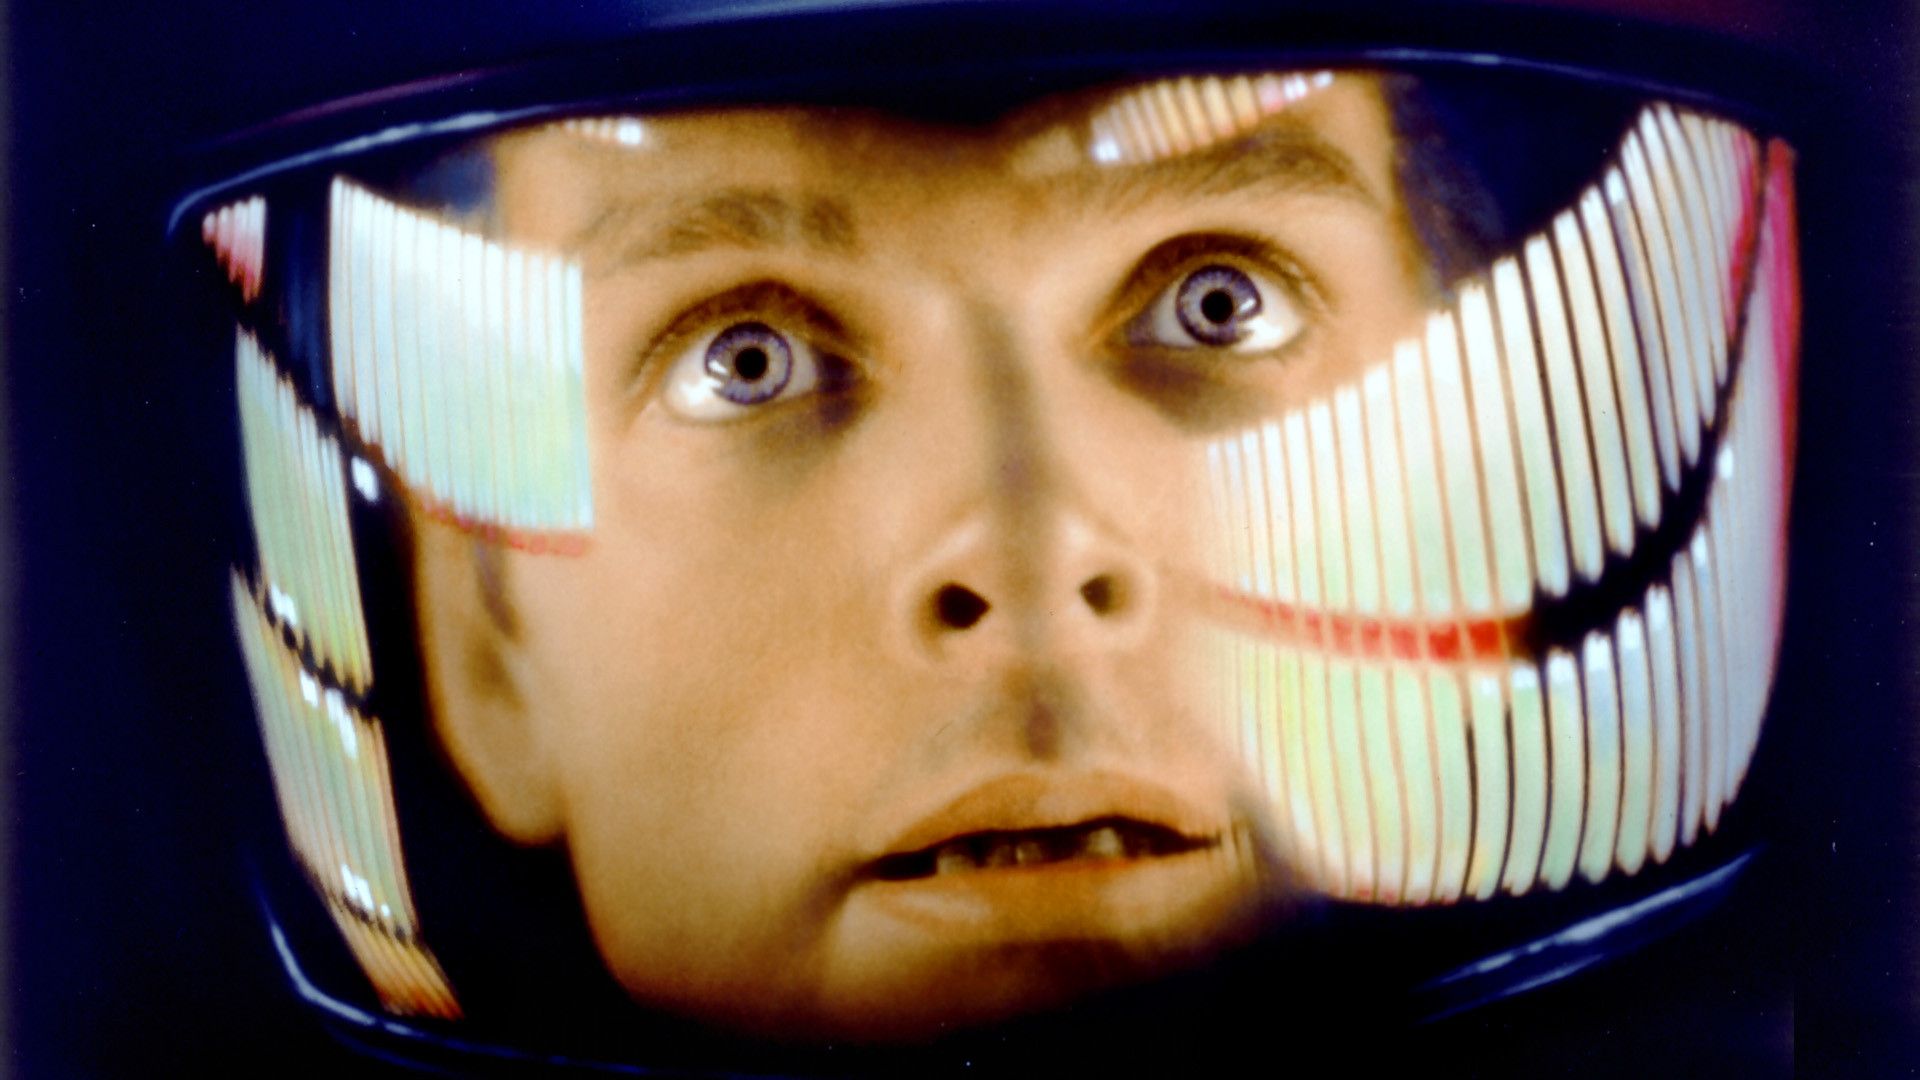 A close-up shot from the movie "2001: Space Odyssey", Kubrick's famous interpretation of the sci-fi genre.